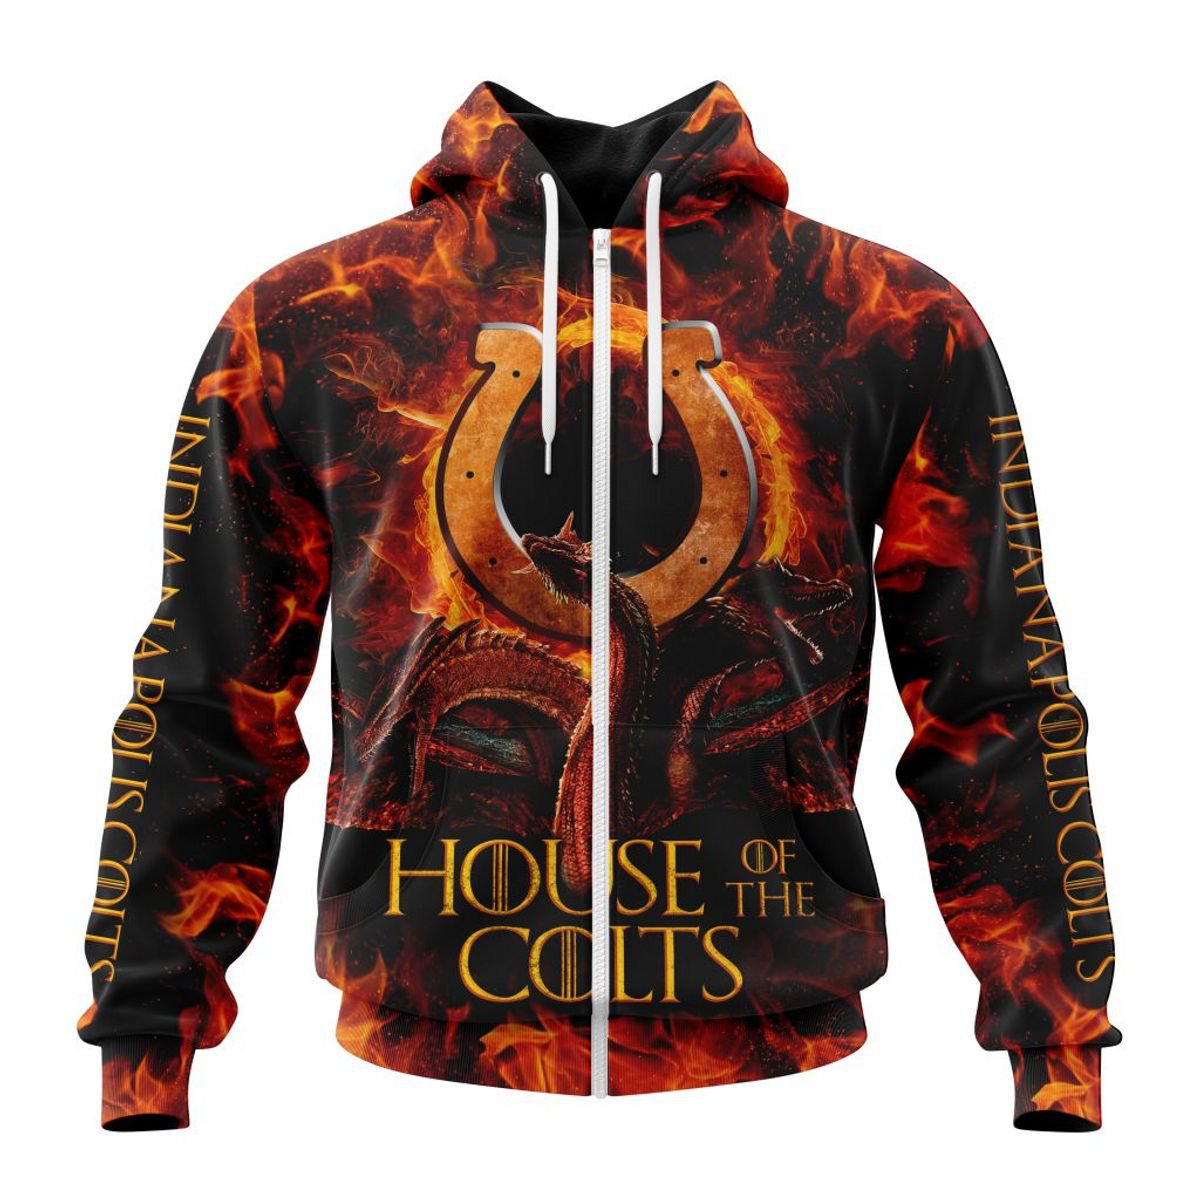 INDIANAPOLIS COLTS GAME OF THRONES – HOUSE OF THE COLTS 3D HOODIE